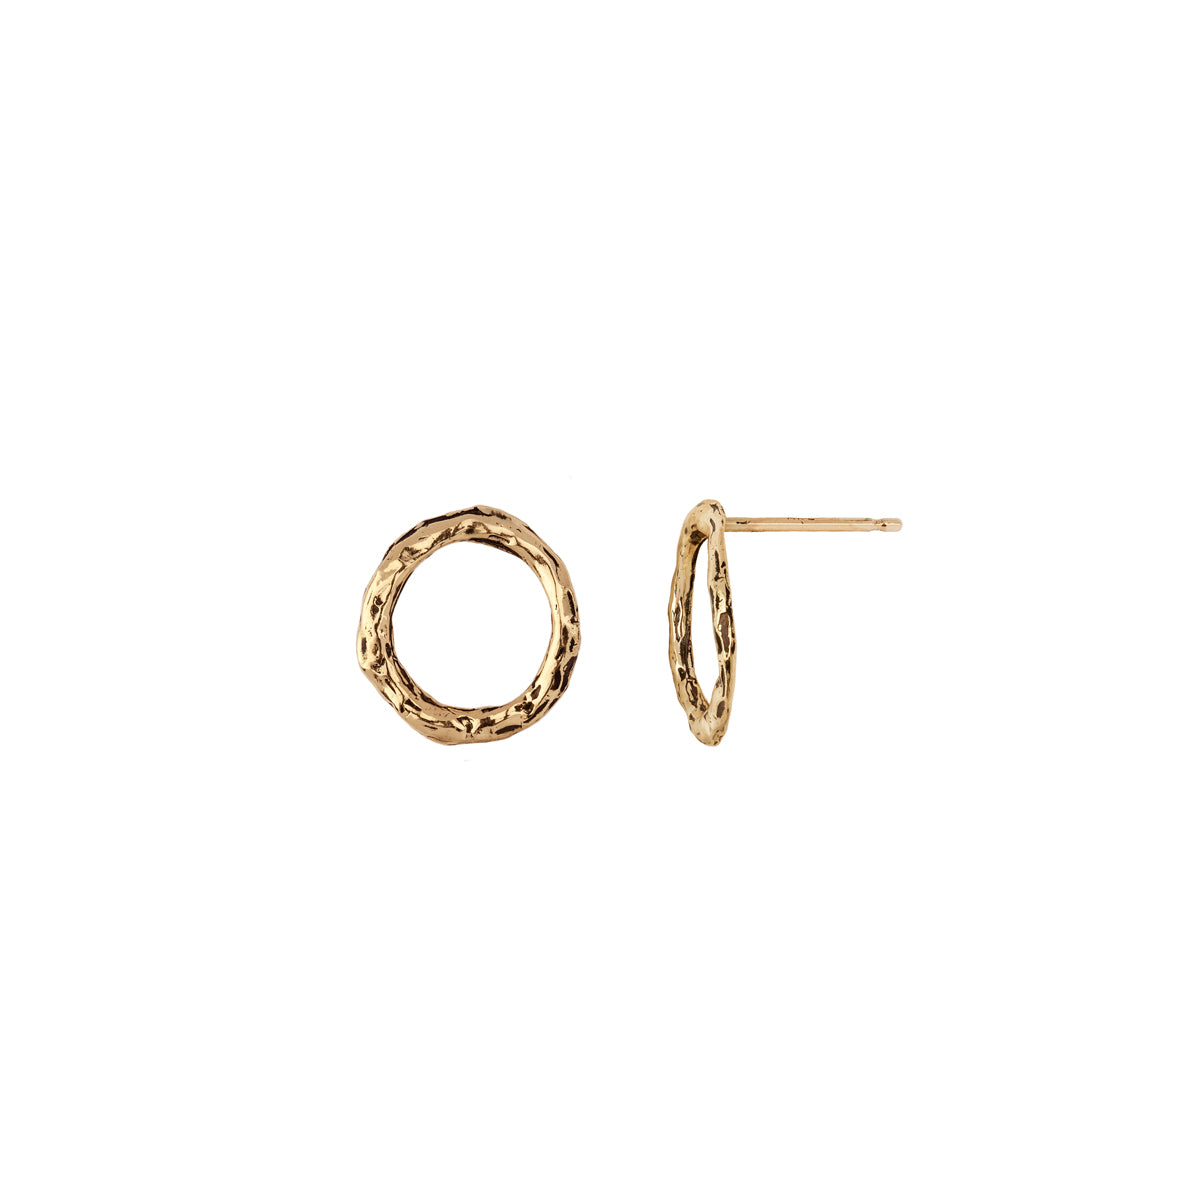 A set of extra small 14k gold stud earrings with an open circle design.